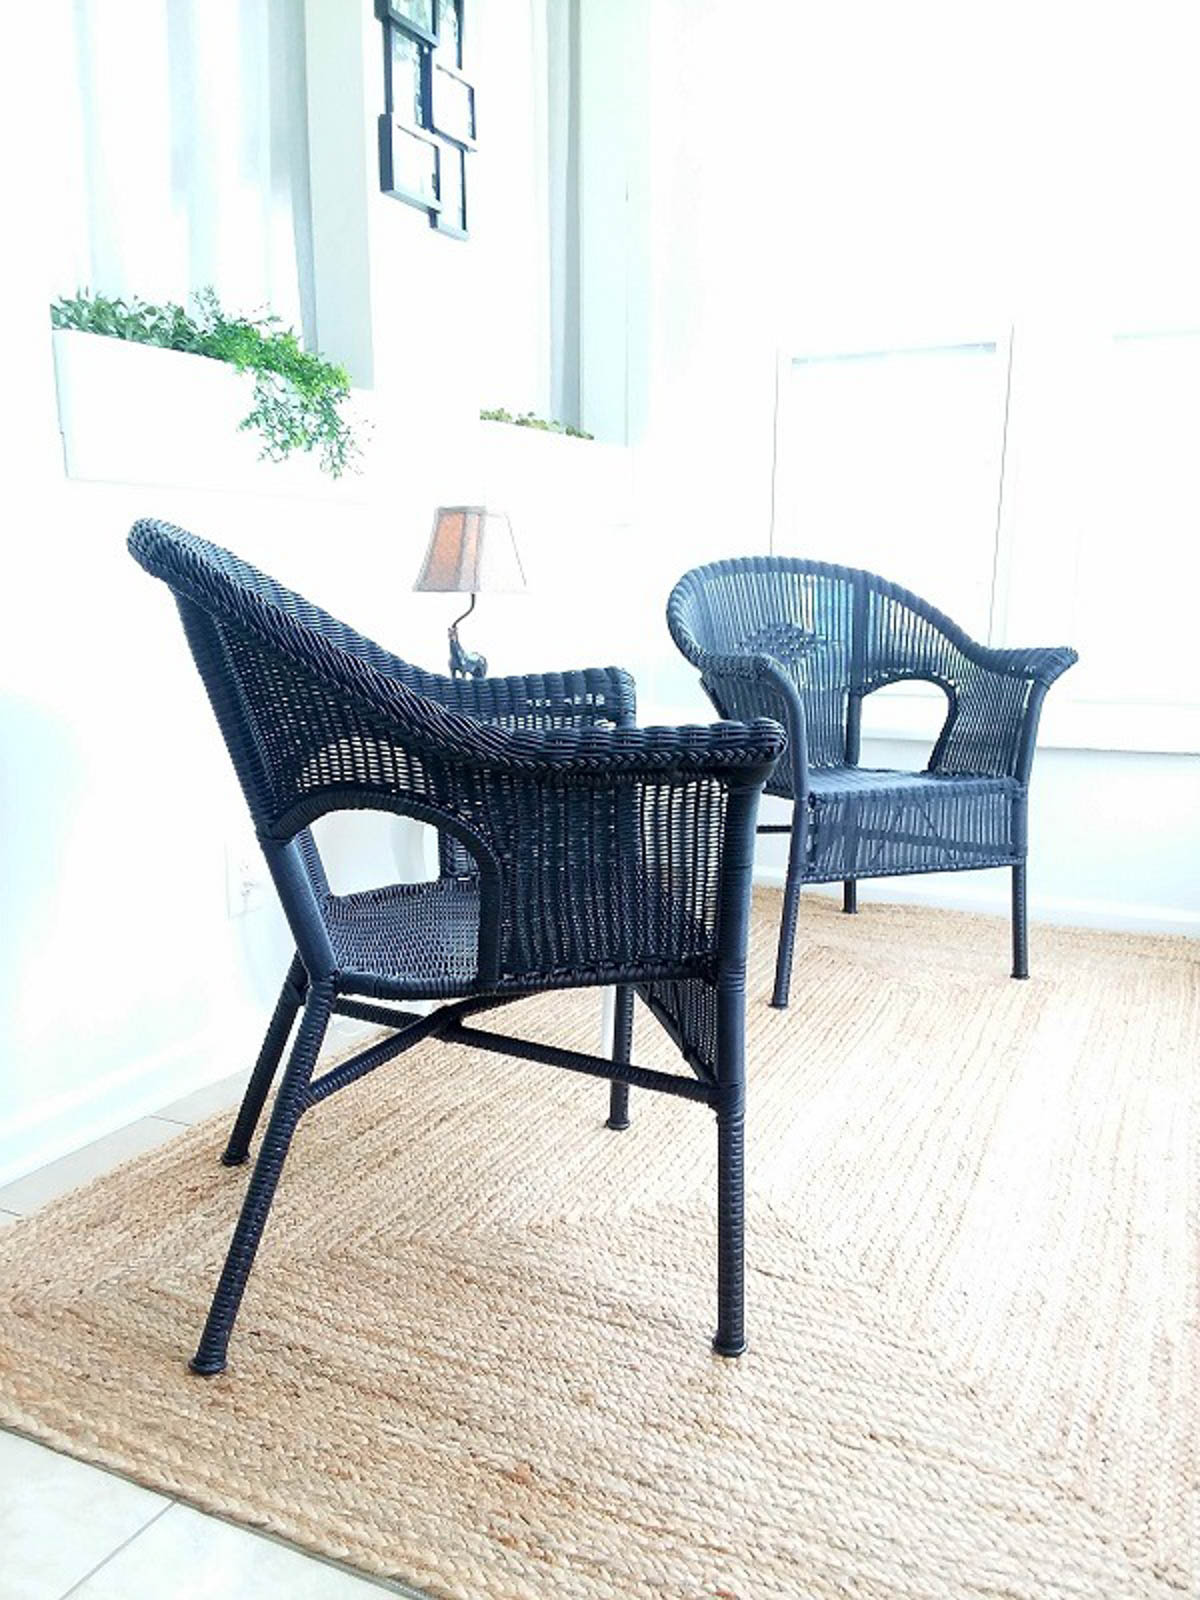 Wicker Chairs spray painted black